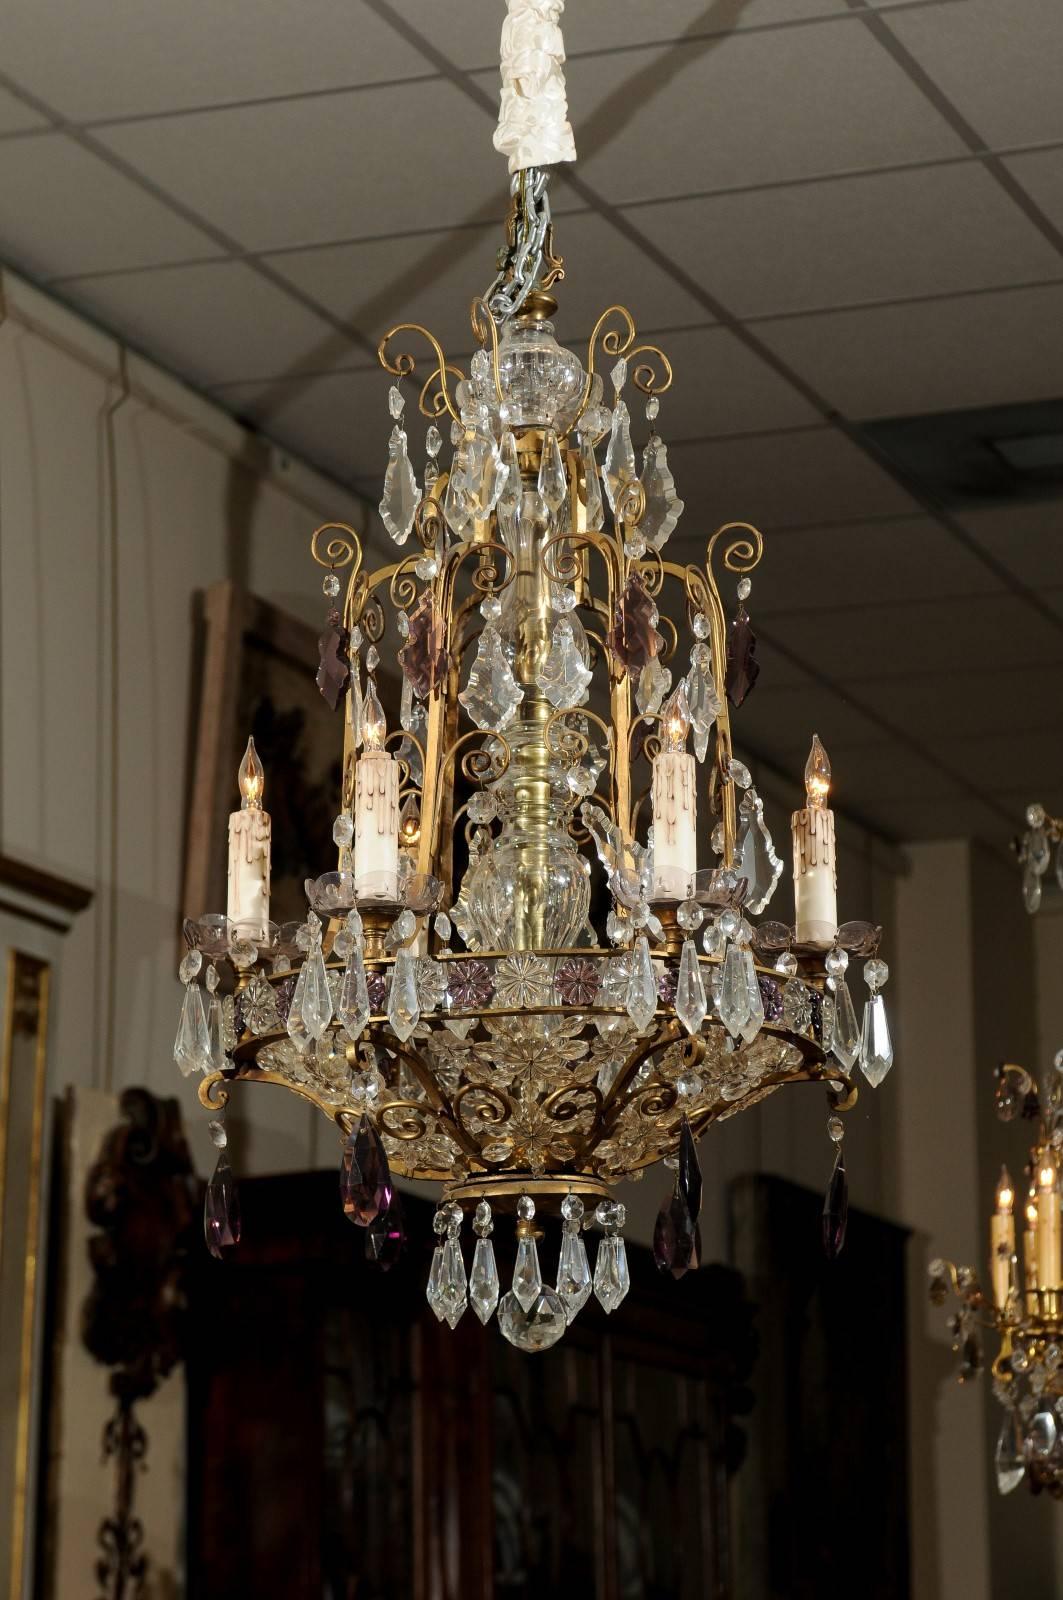 Late 19th / early 20th century chandelier with bronze frame featuring scroll detail and clear and amethyst colored prisms.